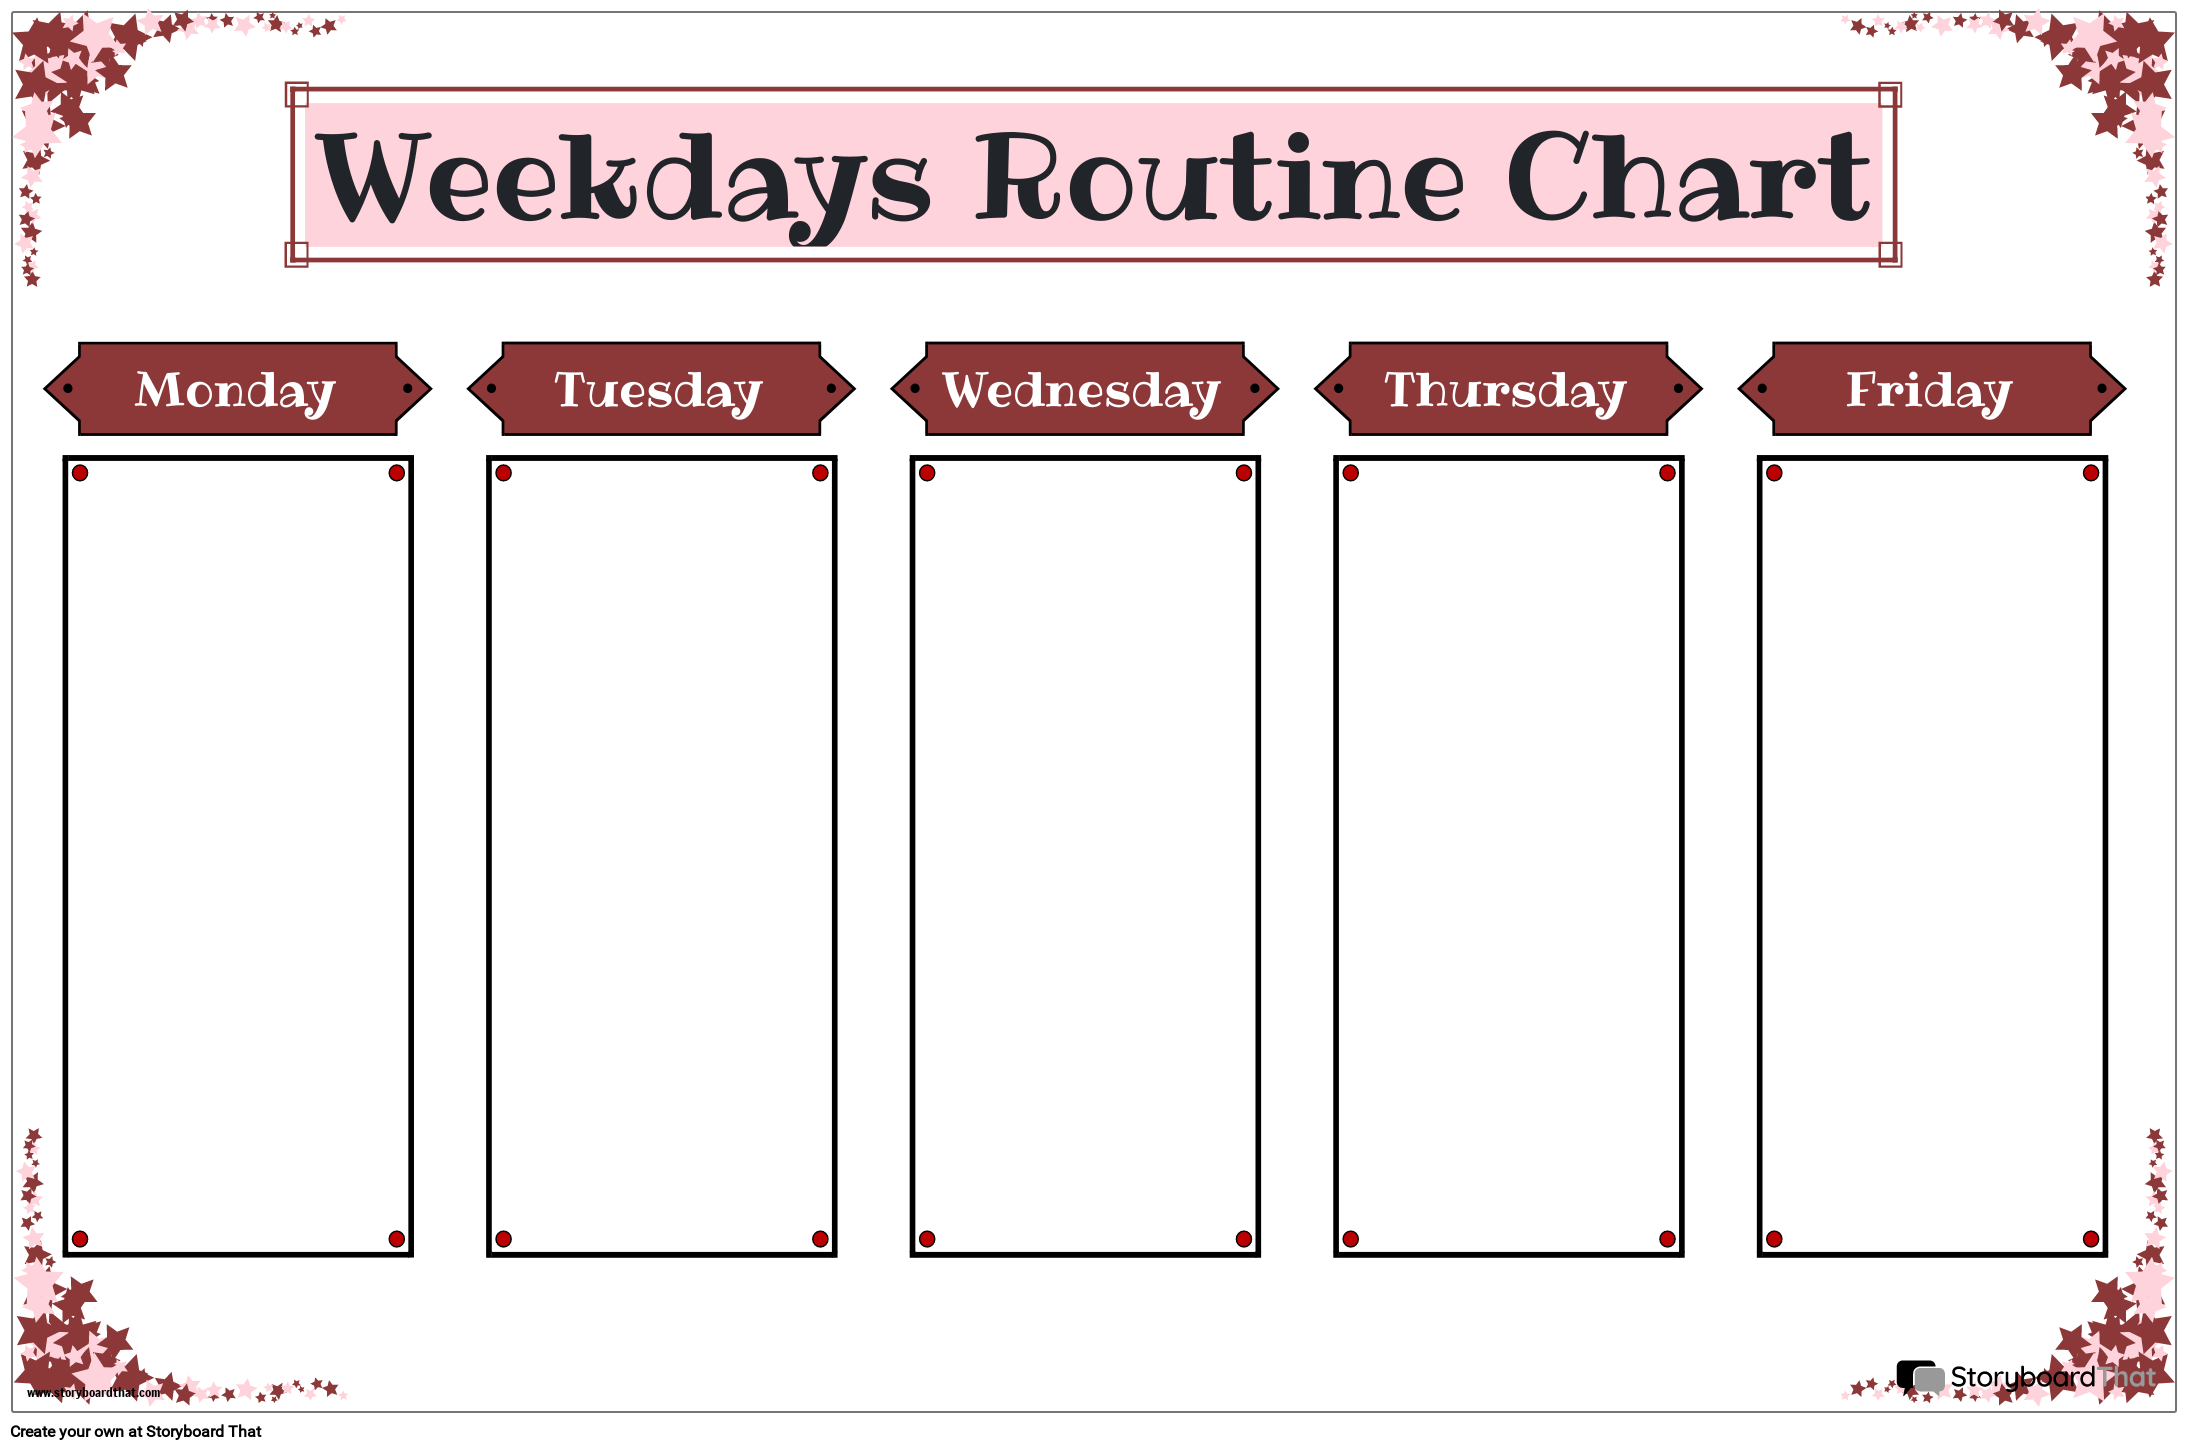 Weekly Routine Chart